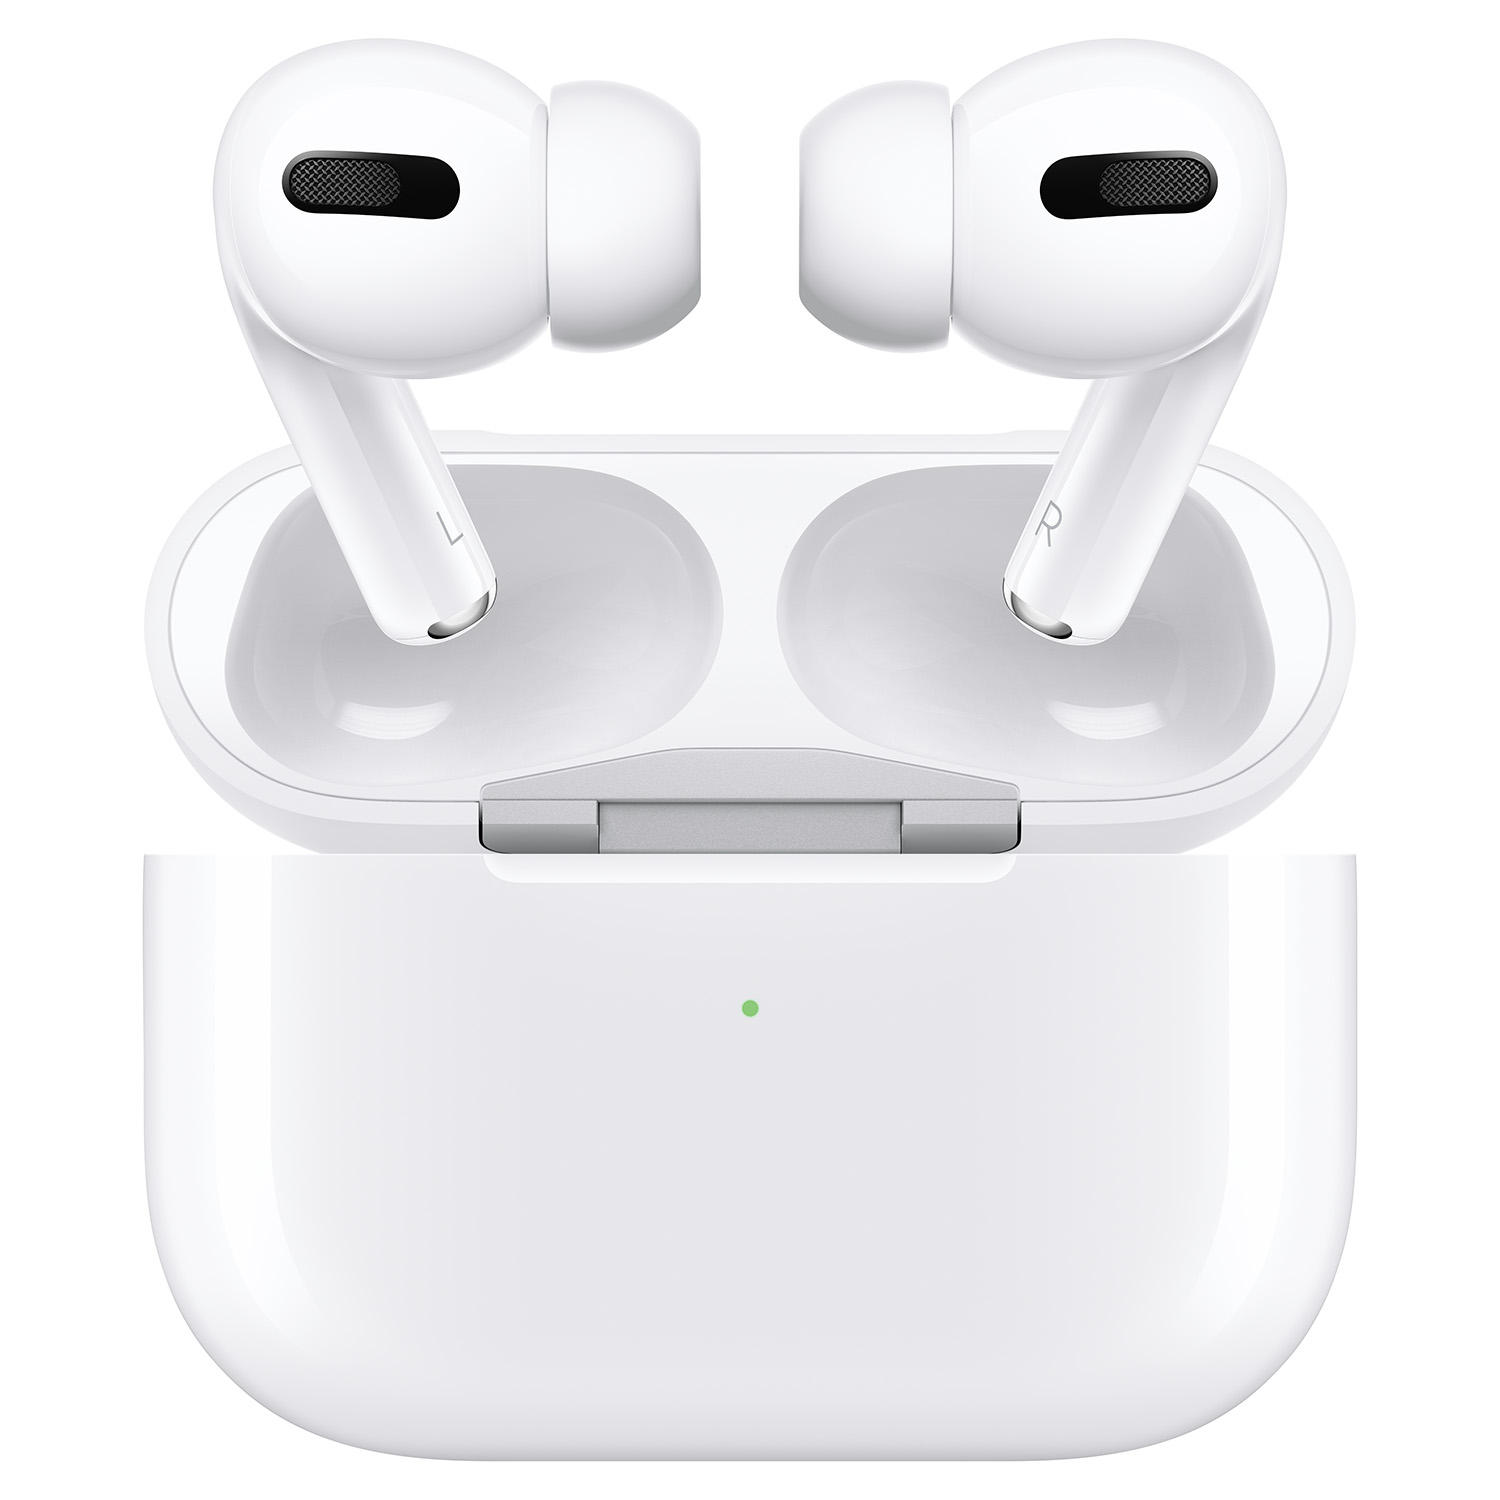 Costco Members: Apple AirPods Pro Wireless Charging Case